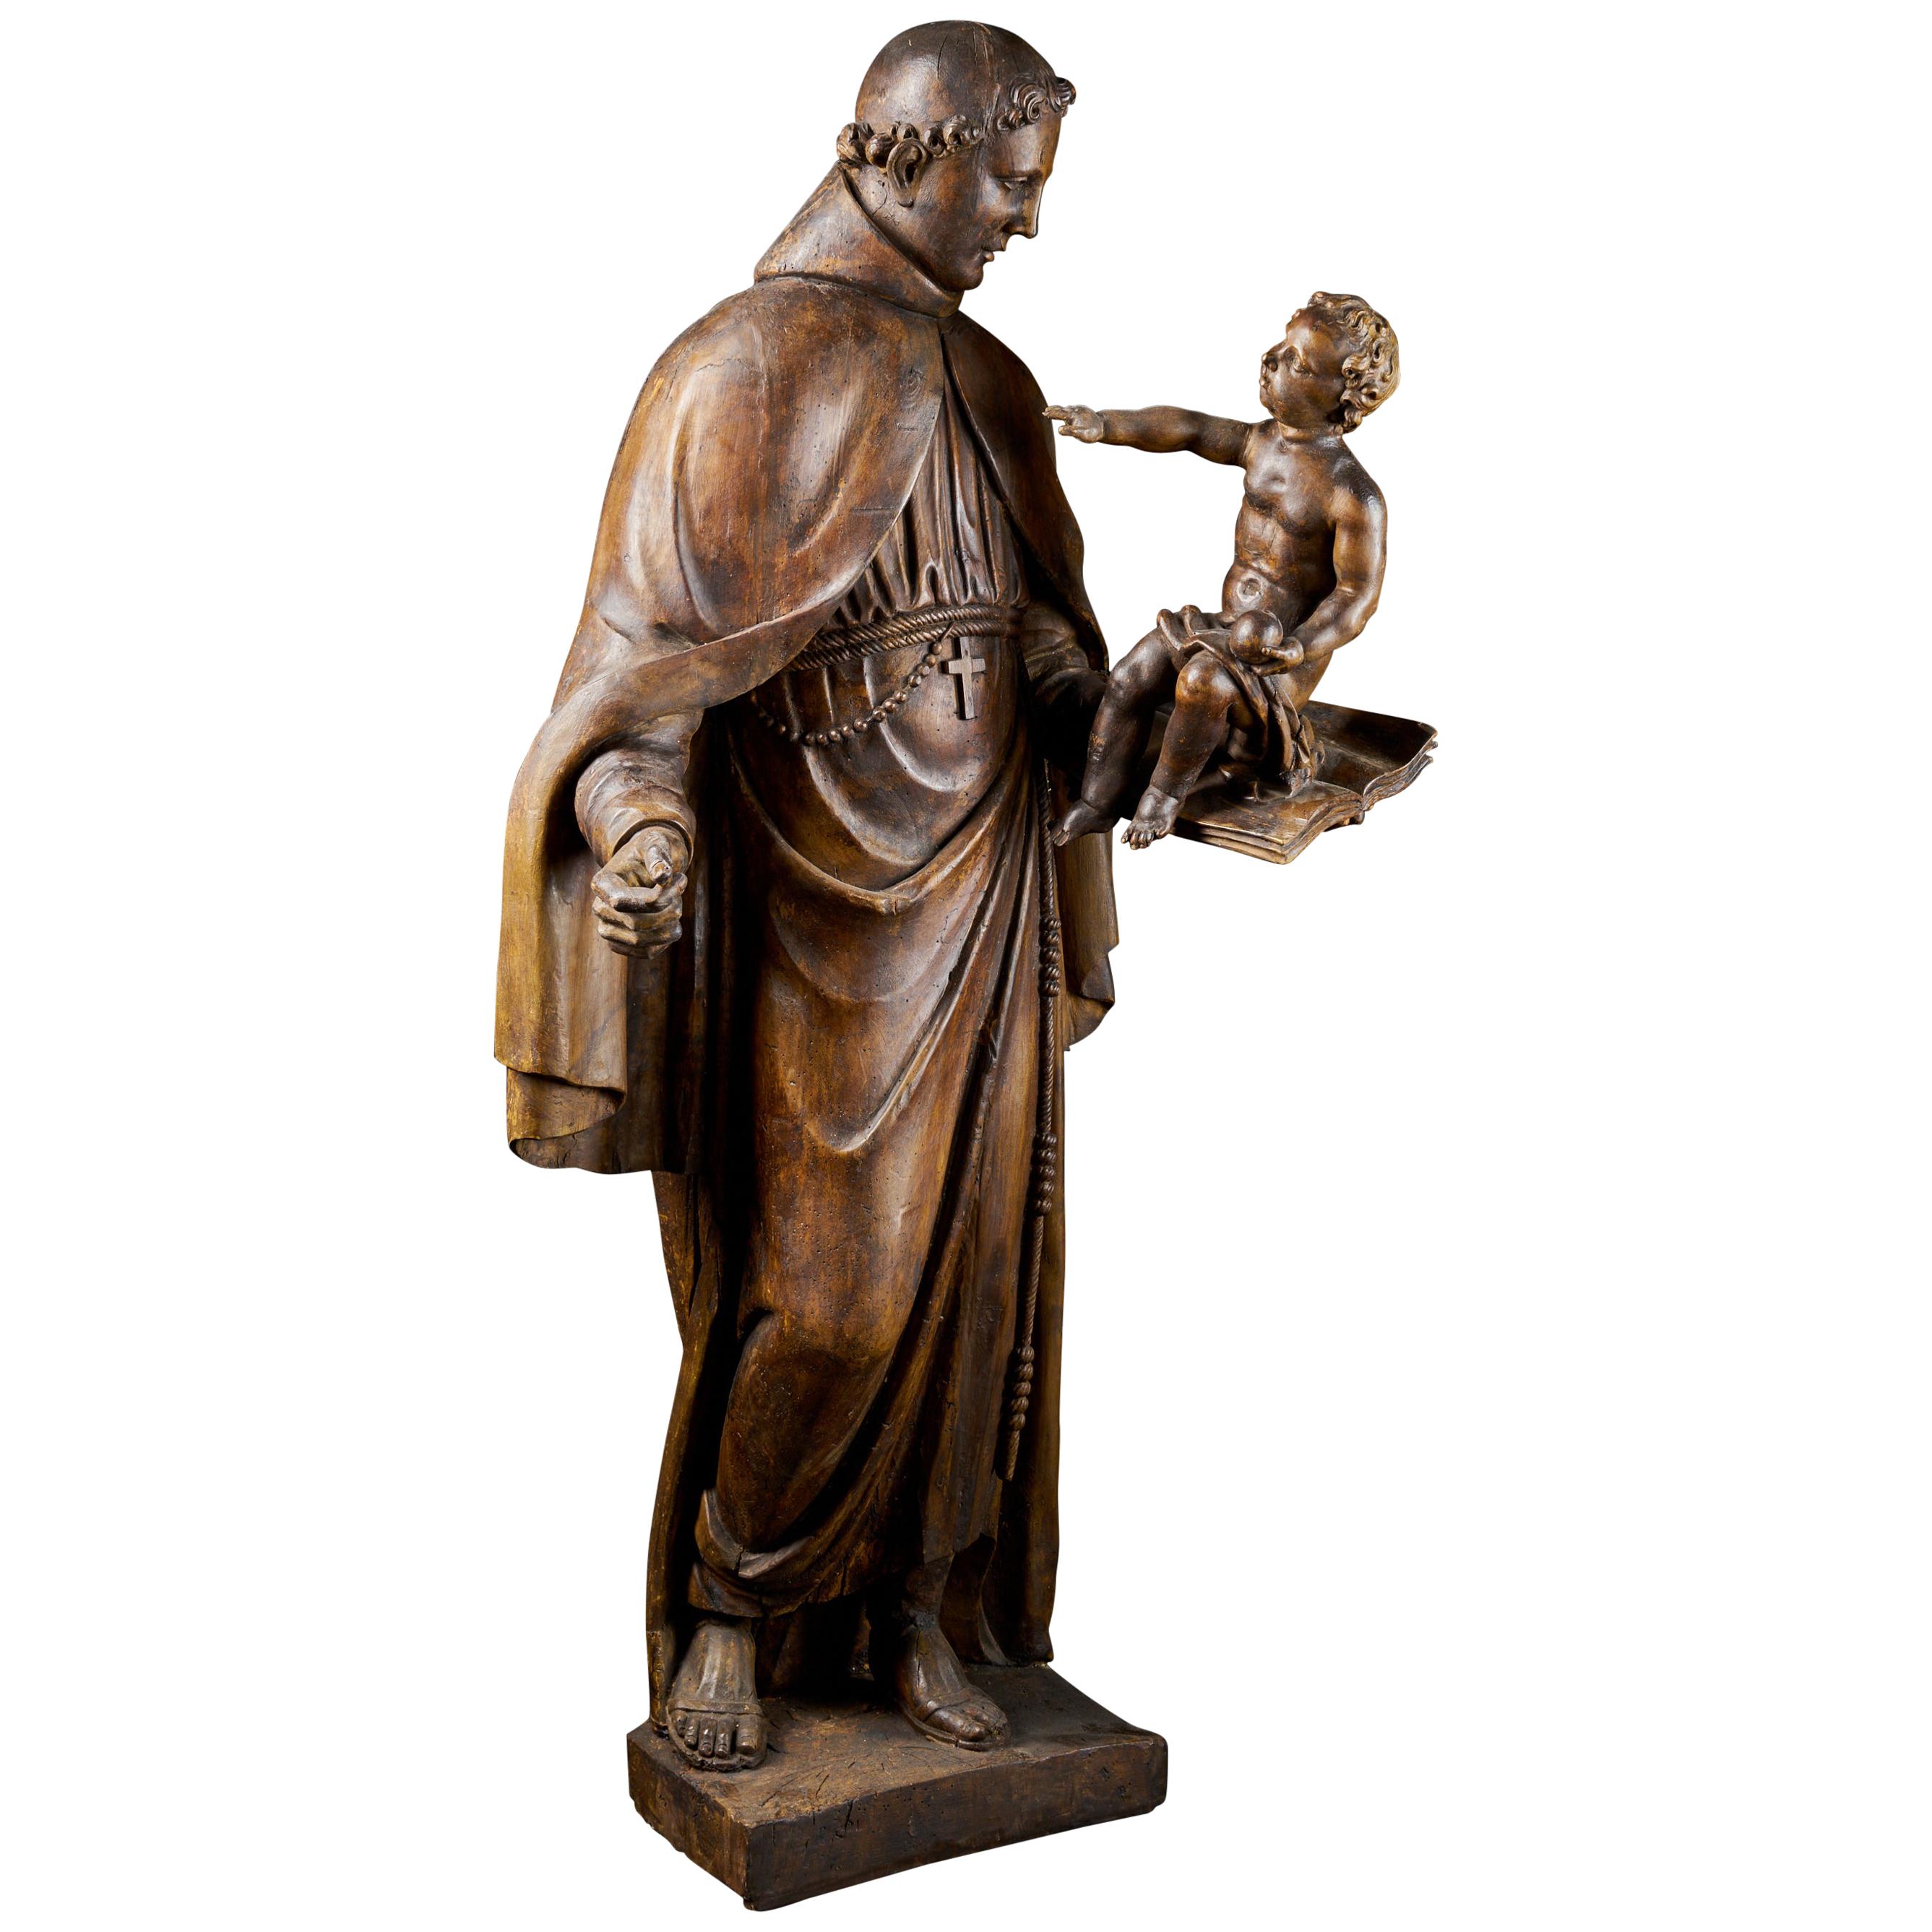 Late 17th Century Italian School Wooden Sculpture of Saint Anthony and the Child